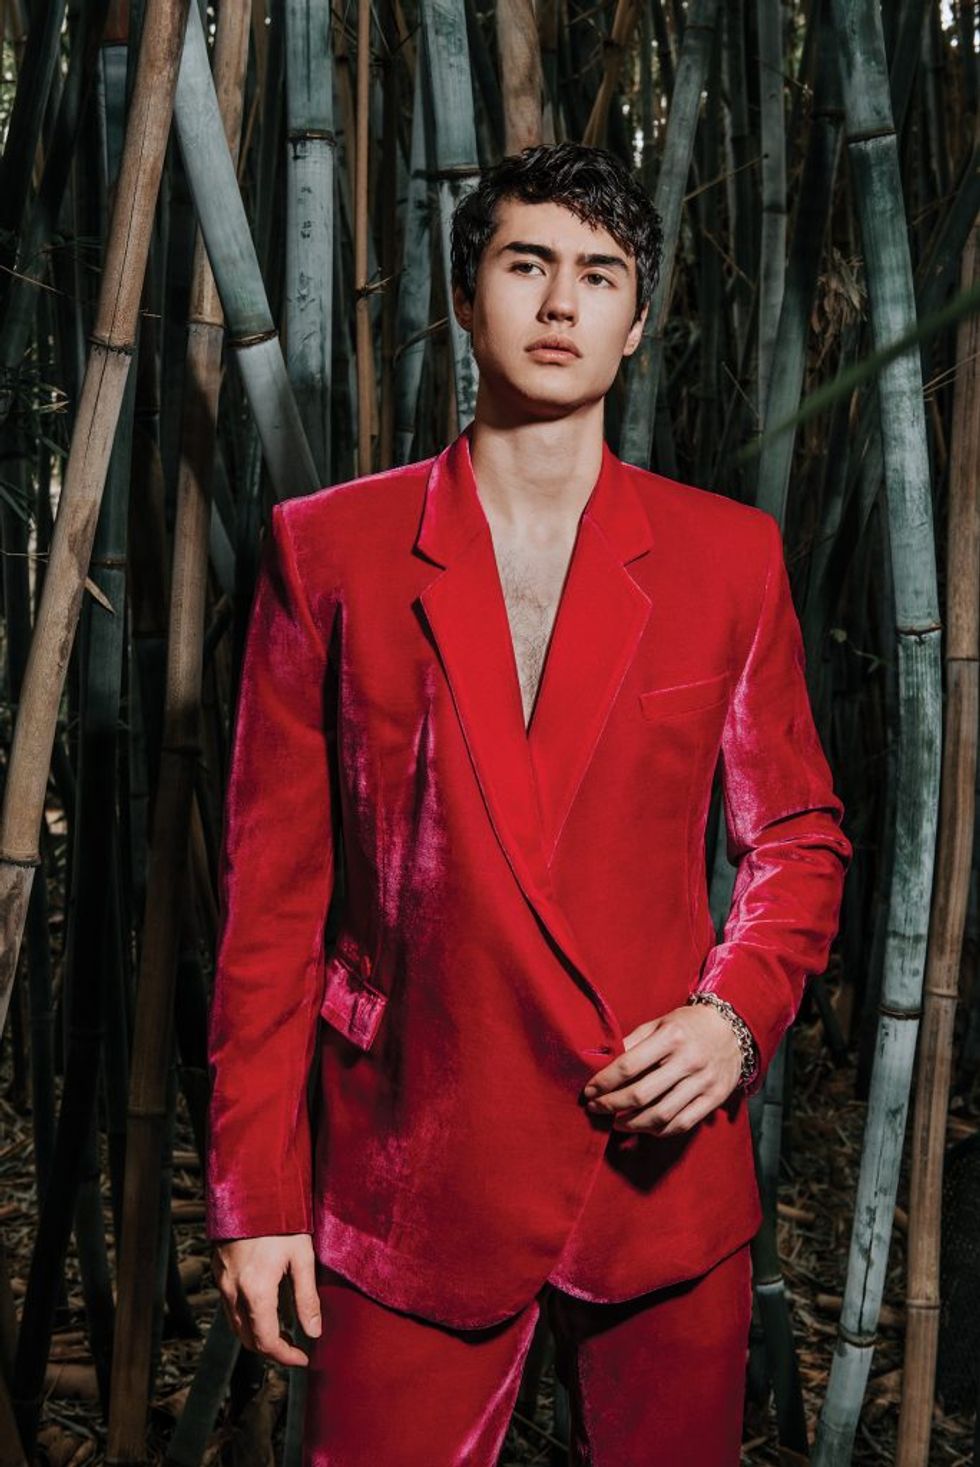 Hot pink velvet double-breasted suit, $1,850, by custom order. With bracelet, $14,500, at Tenenbaum Jewelers.